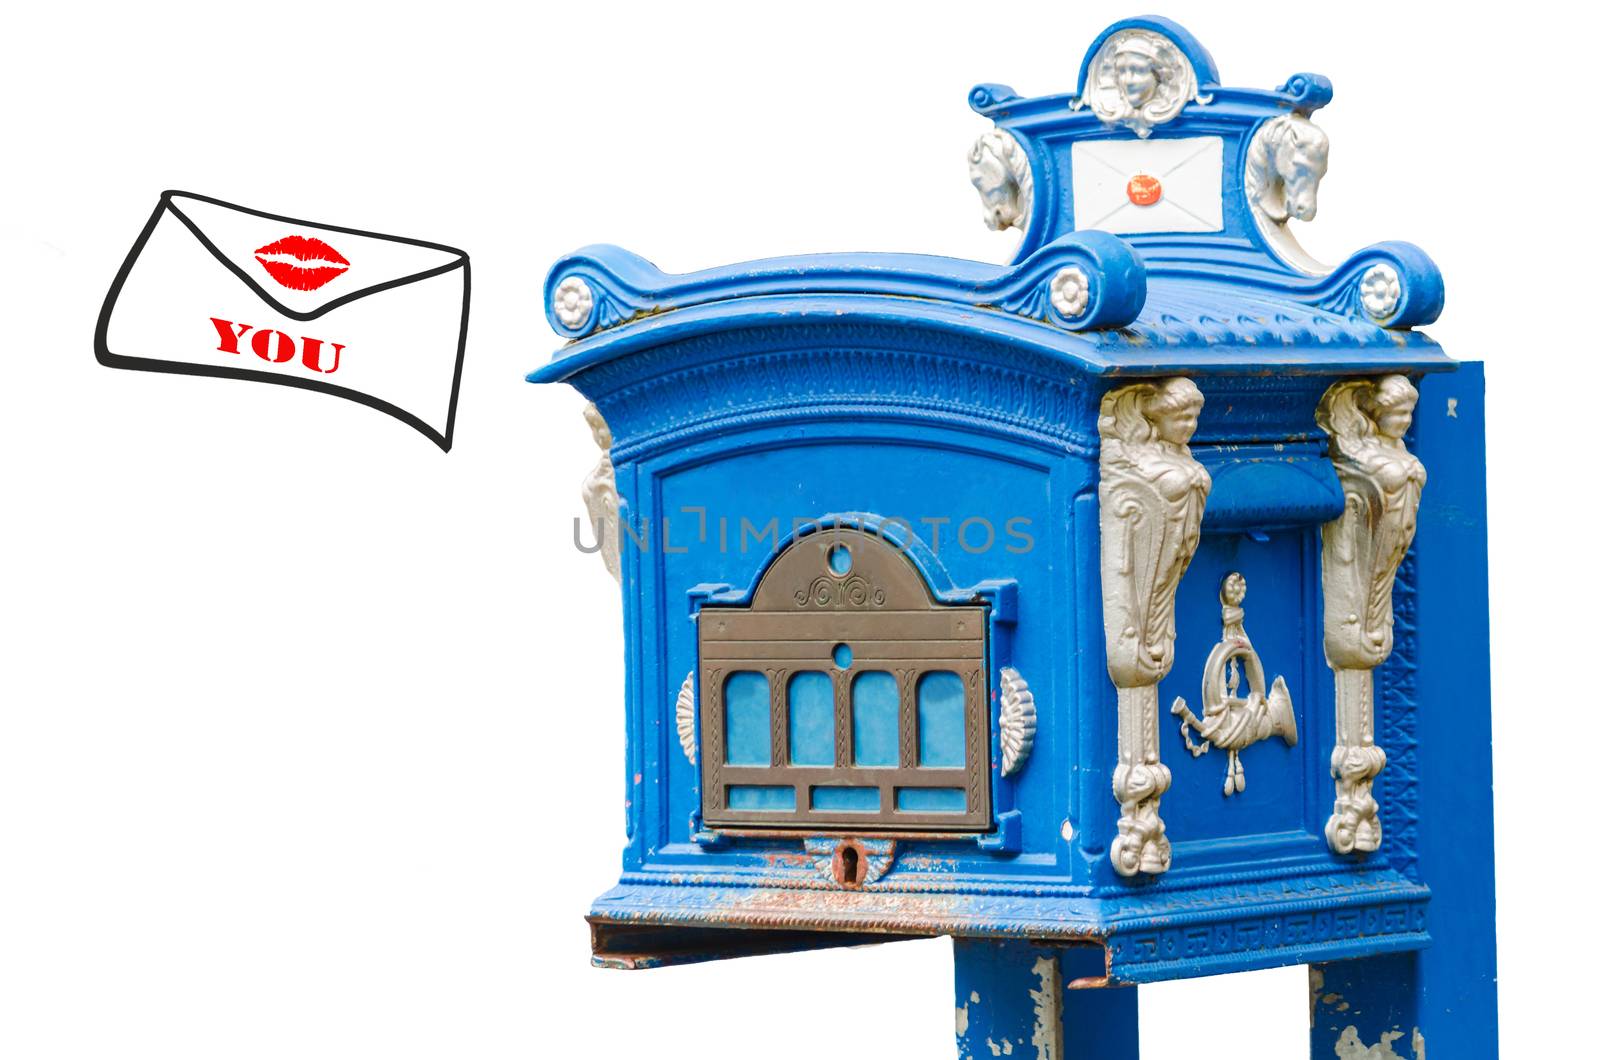 Antique Blue mail box against a white background and an envelope with a red kiss mouth and inscription Love